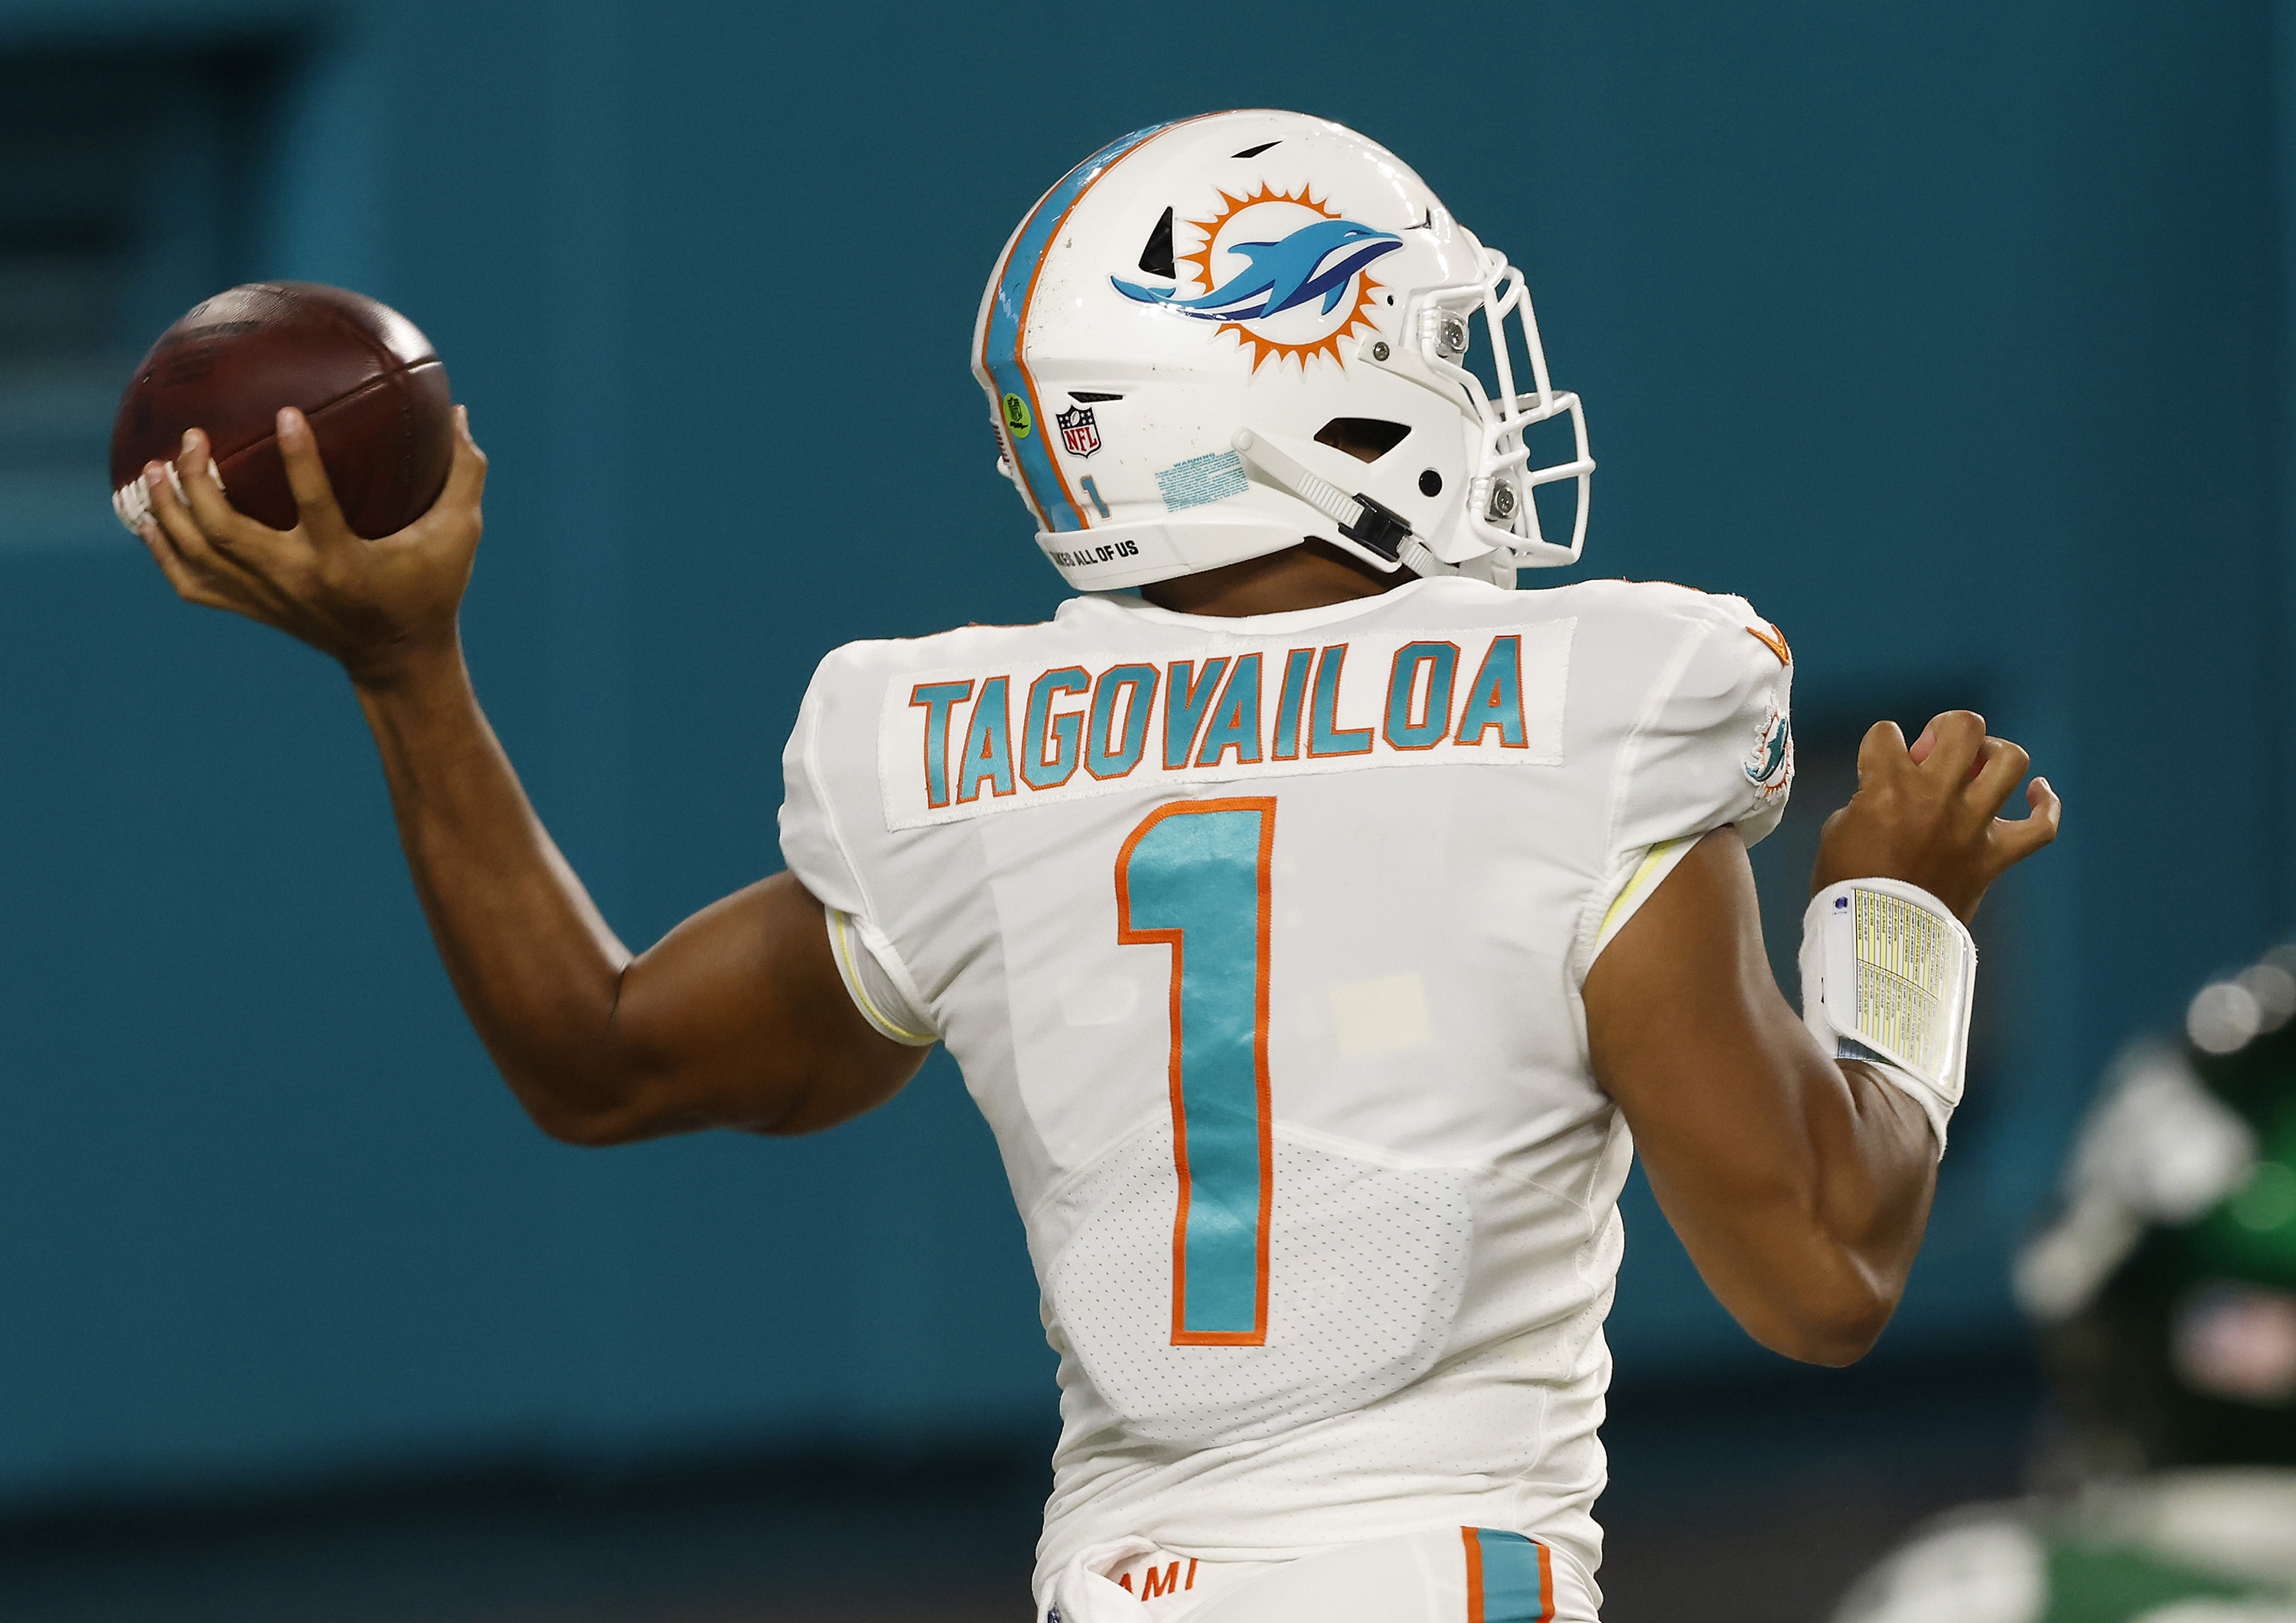 Tua Tagovailoa Is the First LeftHanded QB to Start in the NFL in Five